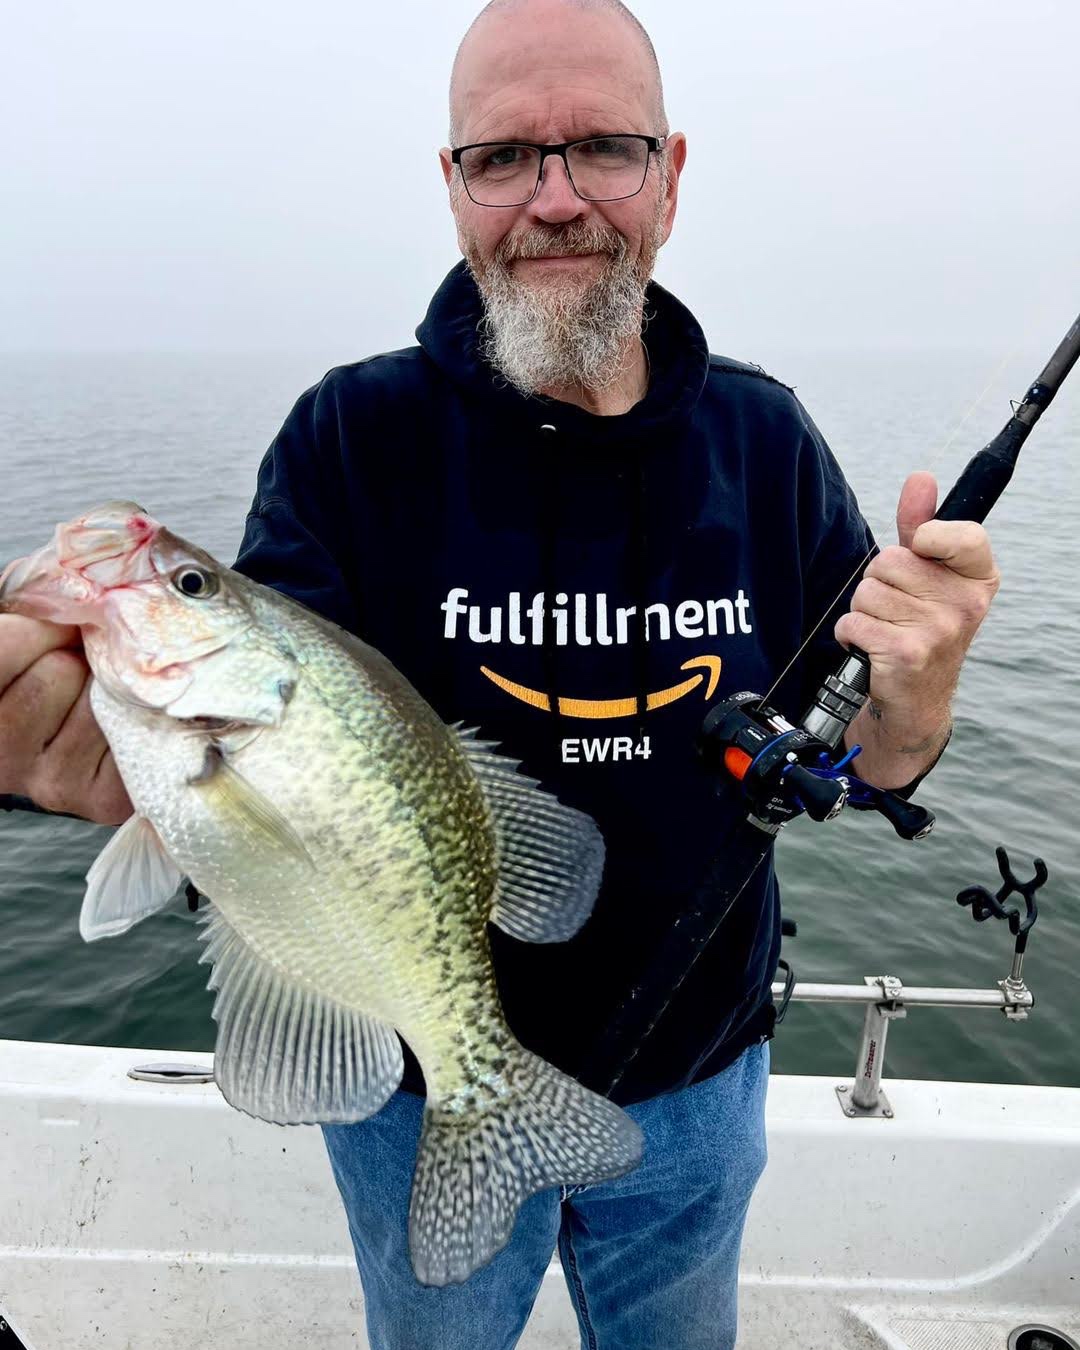 Crappie Now on X: Striper Stealth #CatchTheFever rods aren't just for  stripers! 🎣 Captain J Hook Charters proved their versatility by reeling in  some slabs with ease. No matter the species, trust